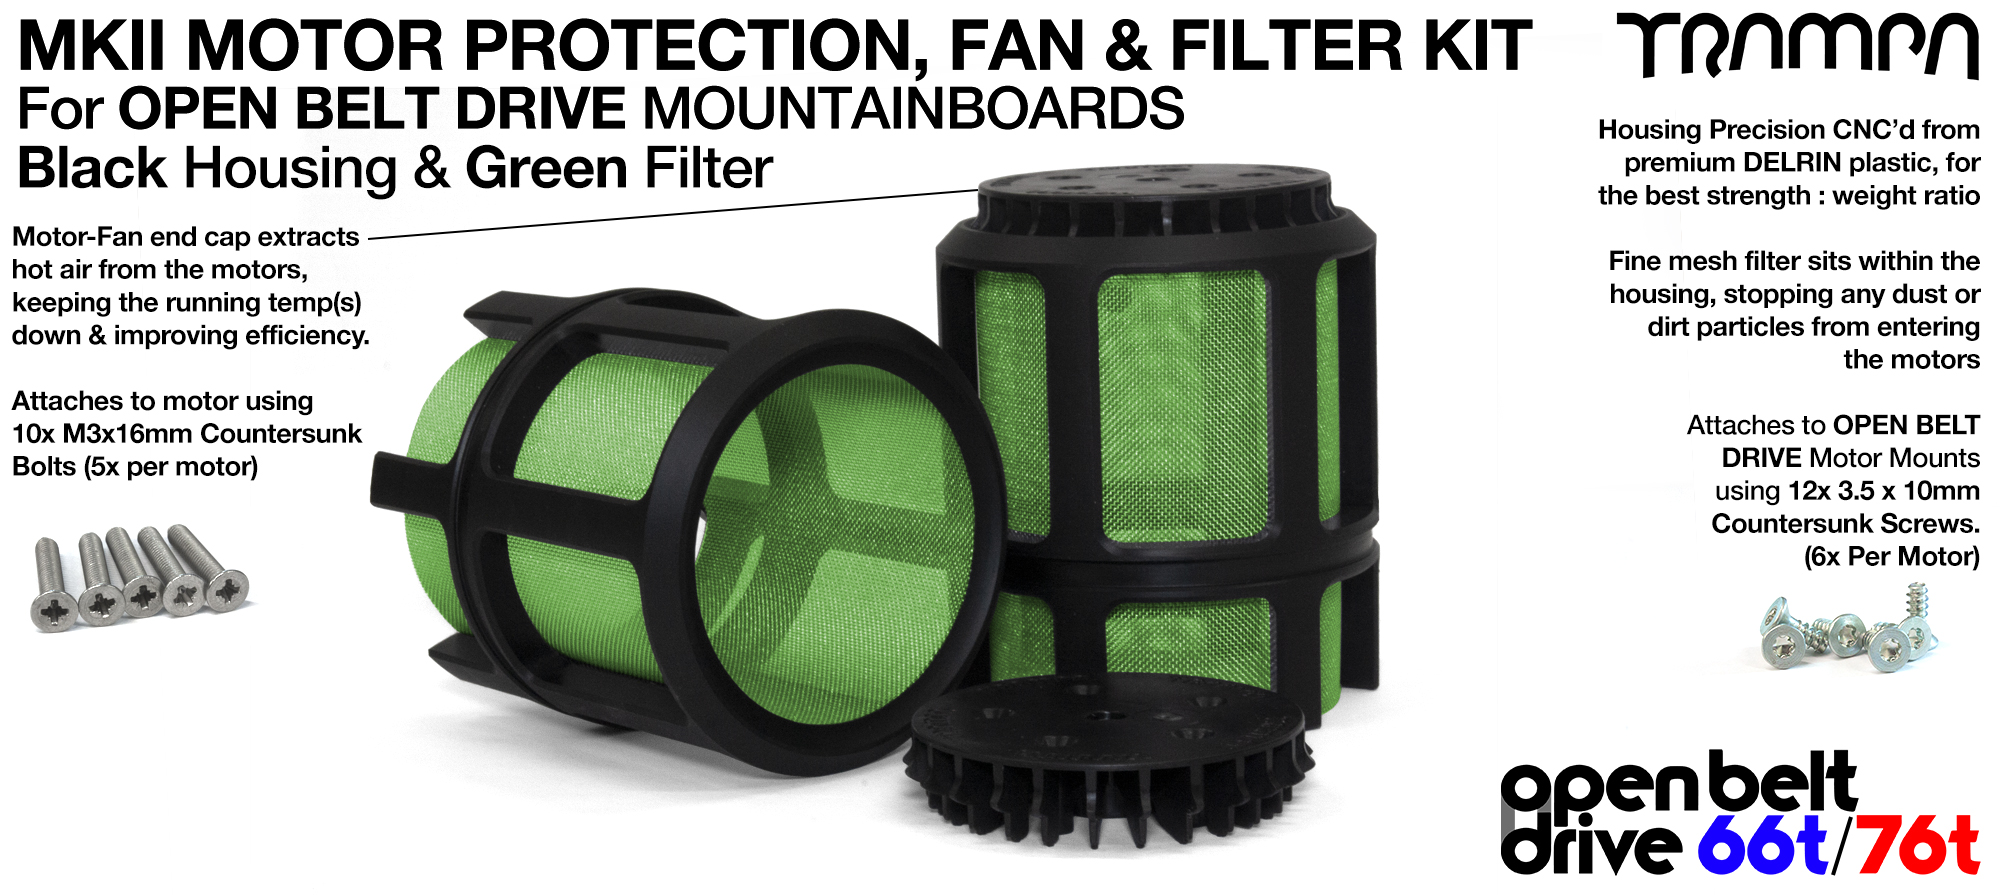 FULL CAGE Motor protection SUPER STRONG DELRIN Plastic includes Fan & GREEN Filter - TWIN